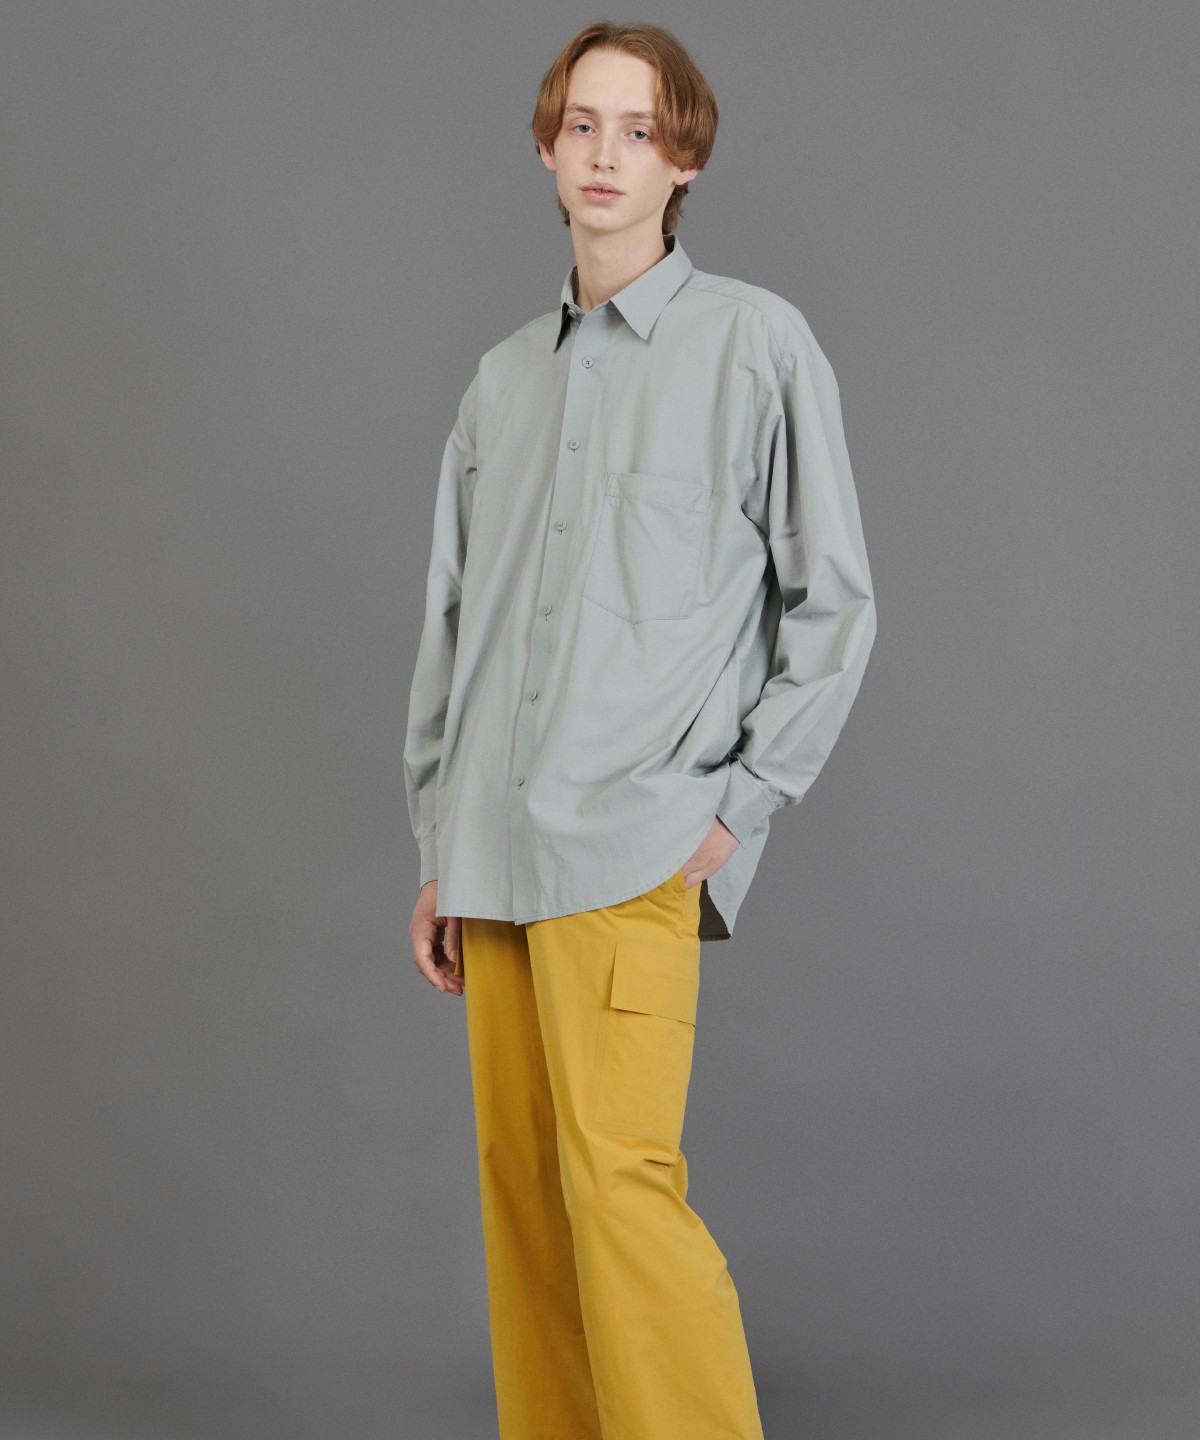 yPAUSEzCARGO PANTS